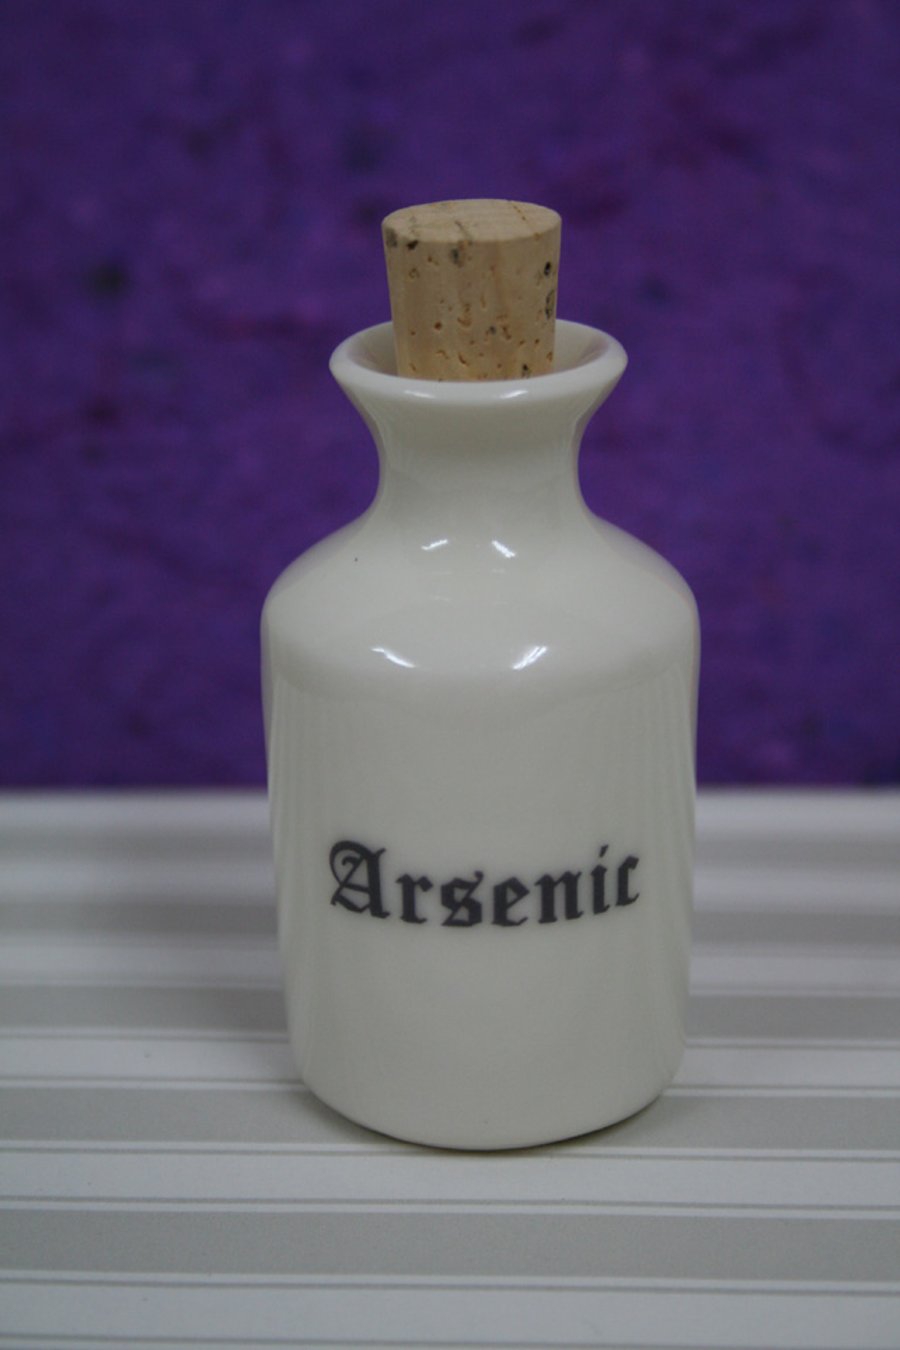 Small porcelain bottle with arsenic wording